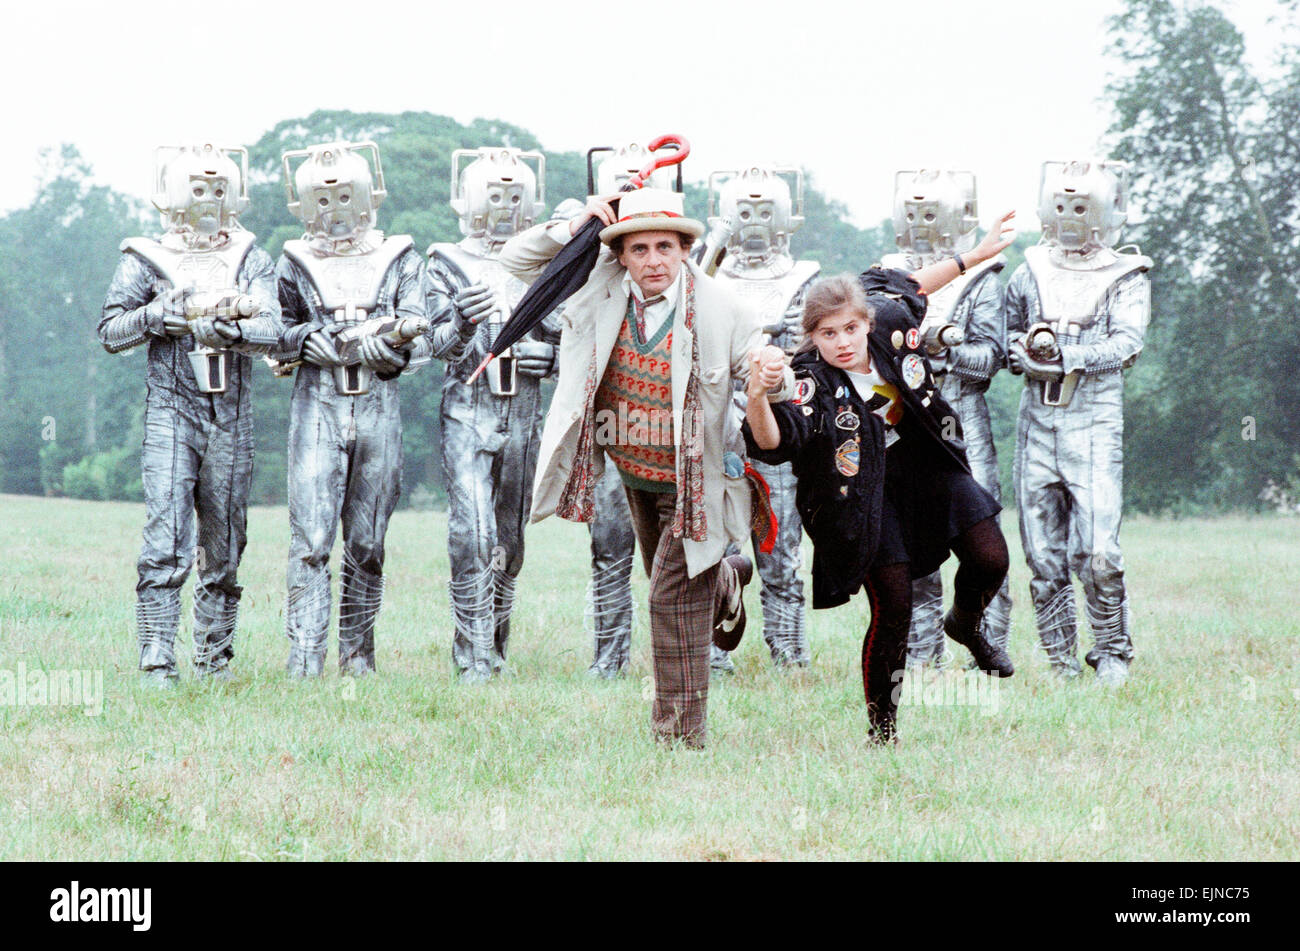 Sylvester McCoy as the Doctor and Sophie Aldred as Ace seen here on location near Arundel with the Cybermen during the filming of the Dr Who story called The Silver Nemesis. 28th June 1988 Stock Photo